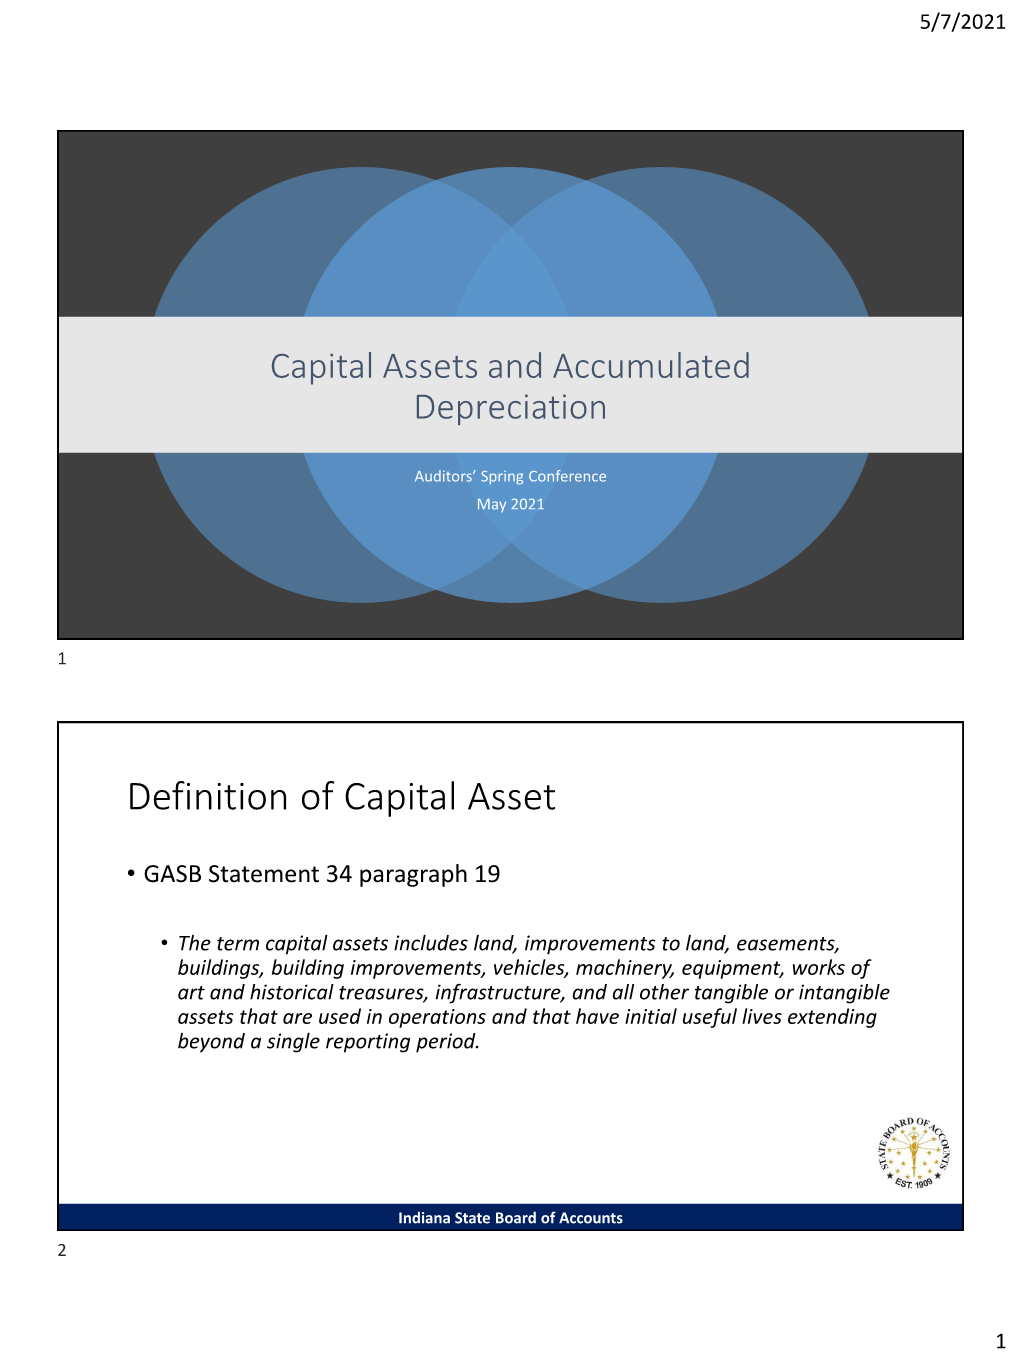 Definition of Capital Asset